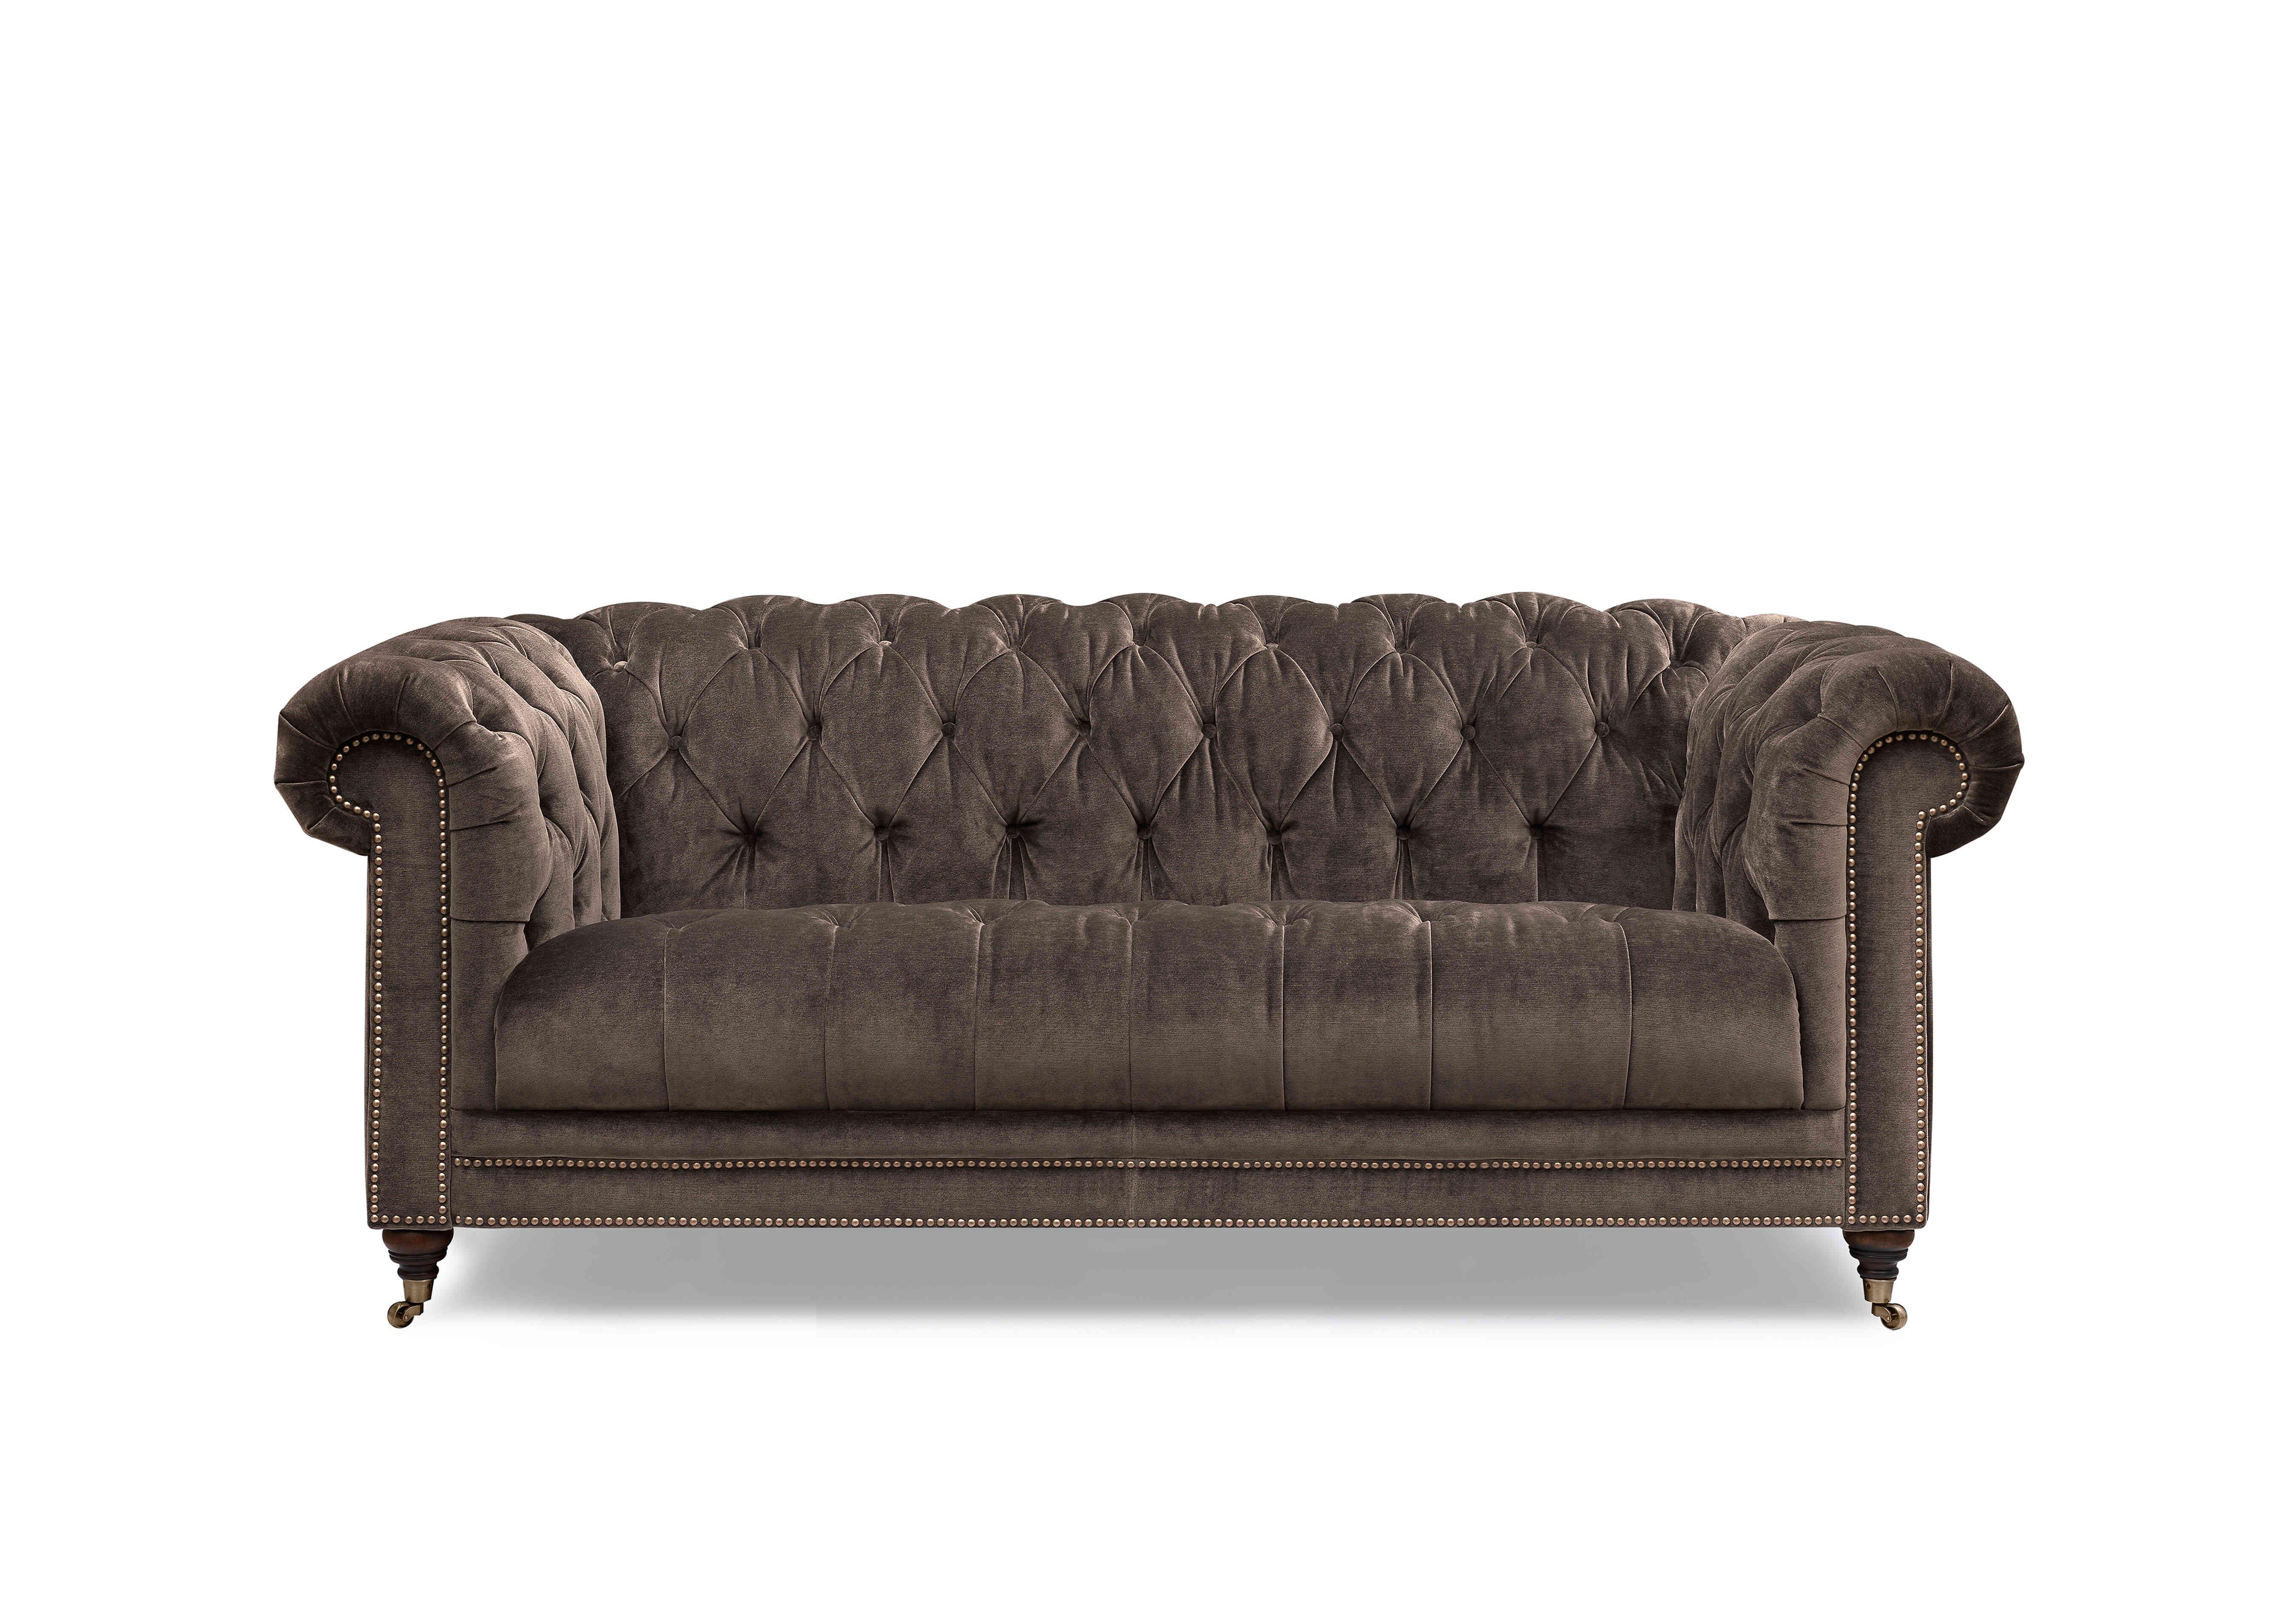 Walter 3 Seater Fabric Chesterfield Sofa in X3y1-W020 Brindle on Furniture Village